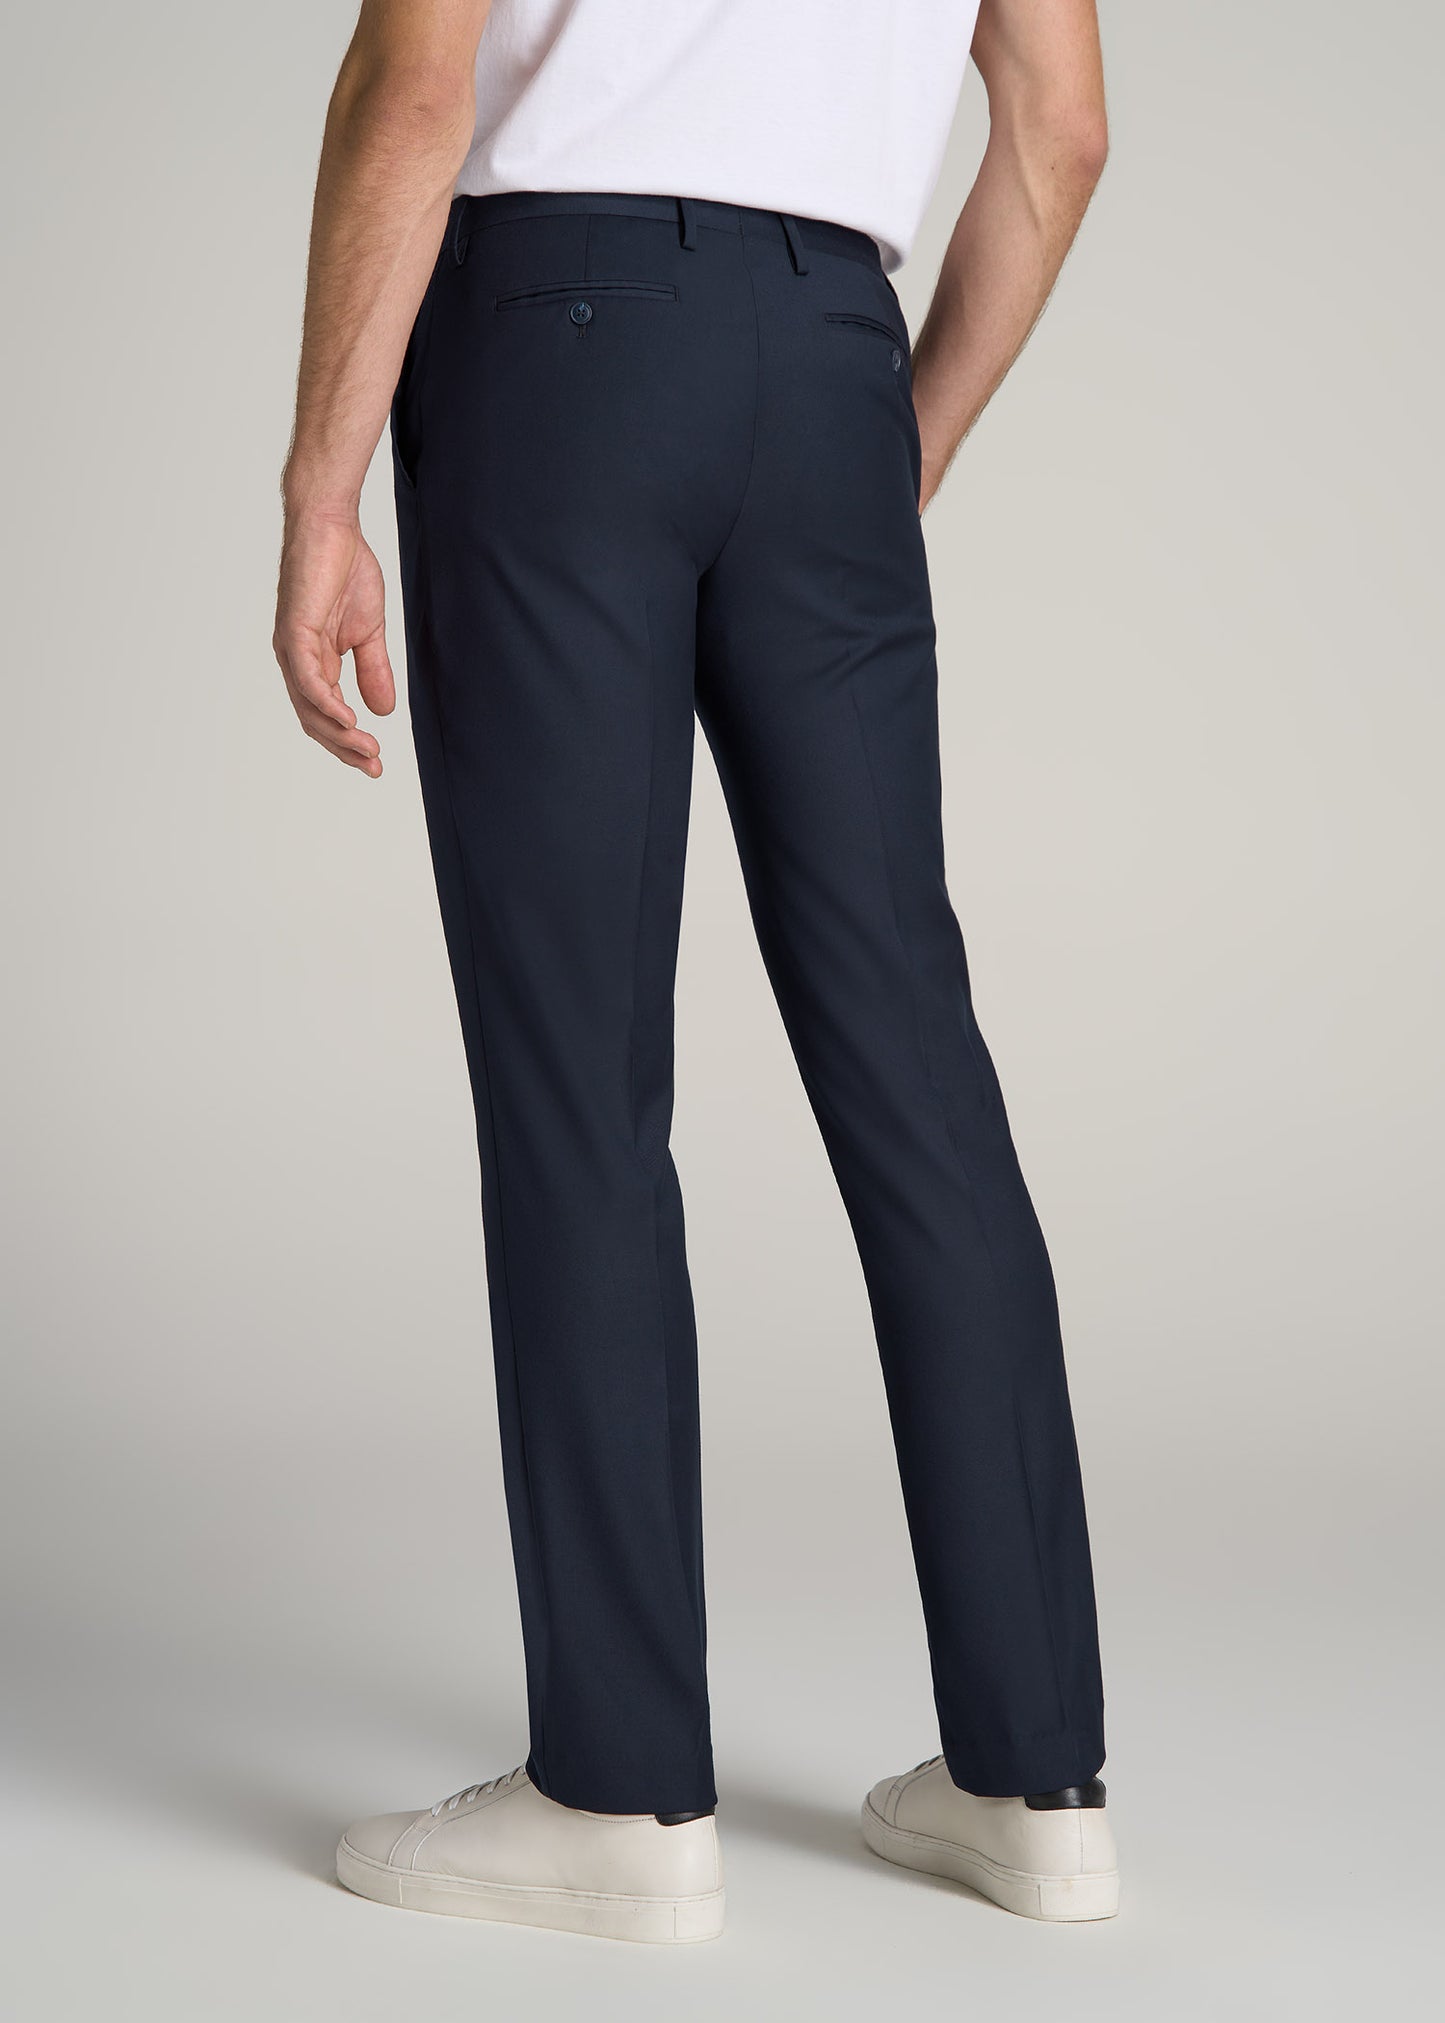 Men's formal Trousers, classic and made in Italy | Pal Zileri